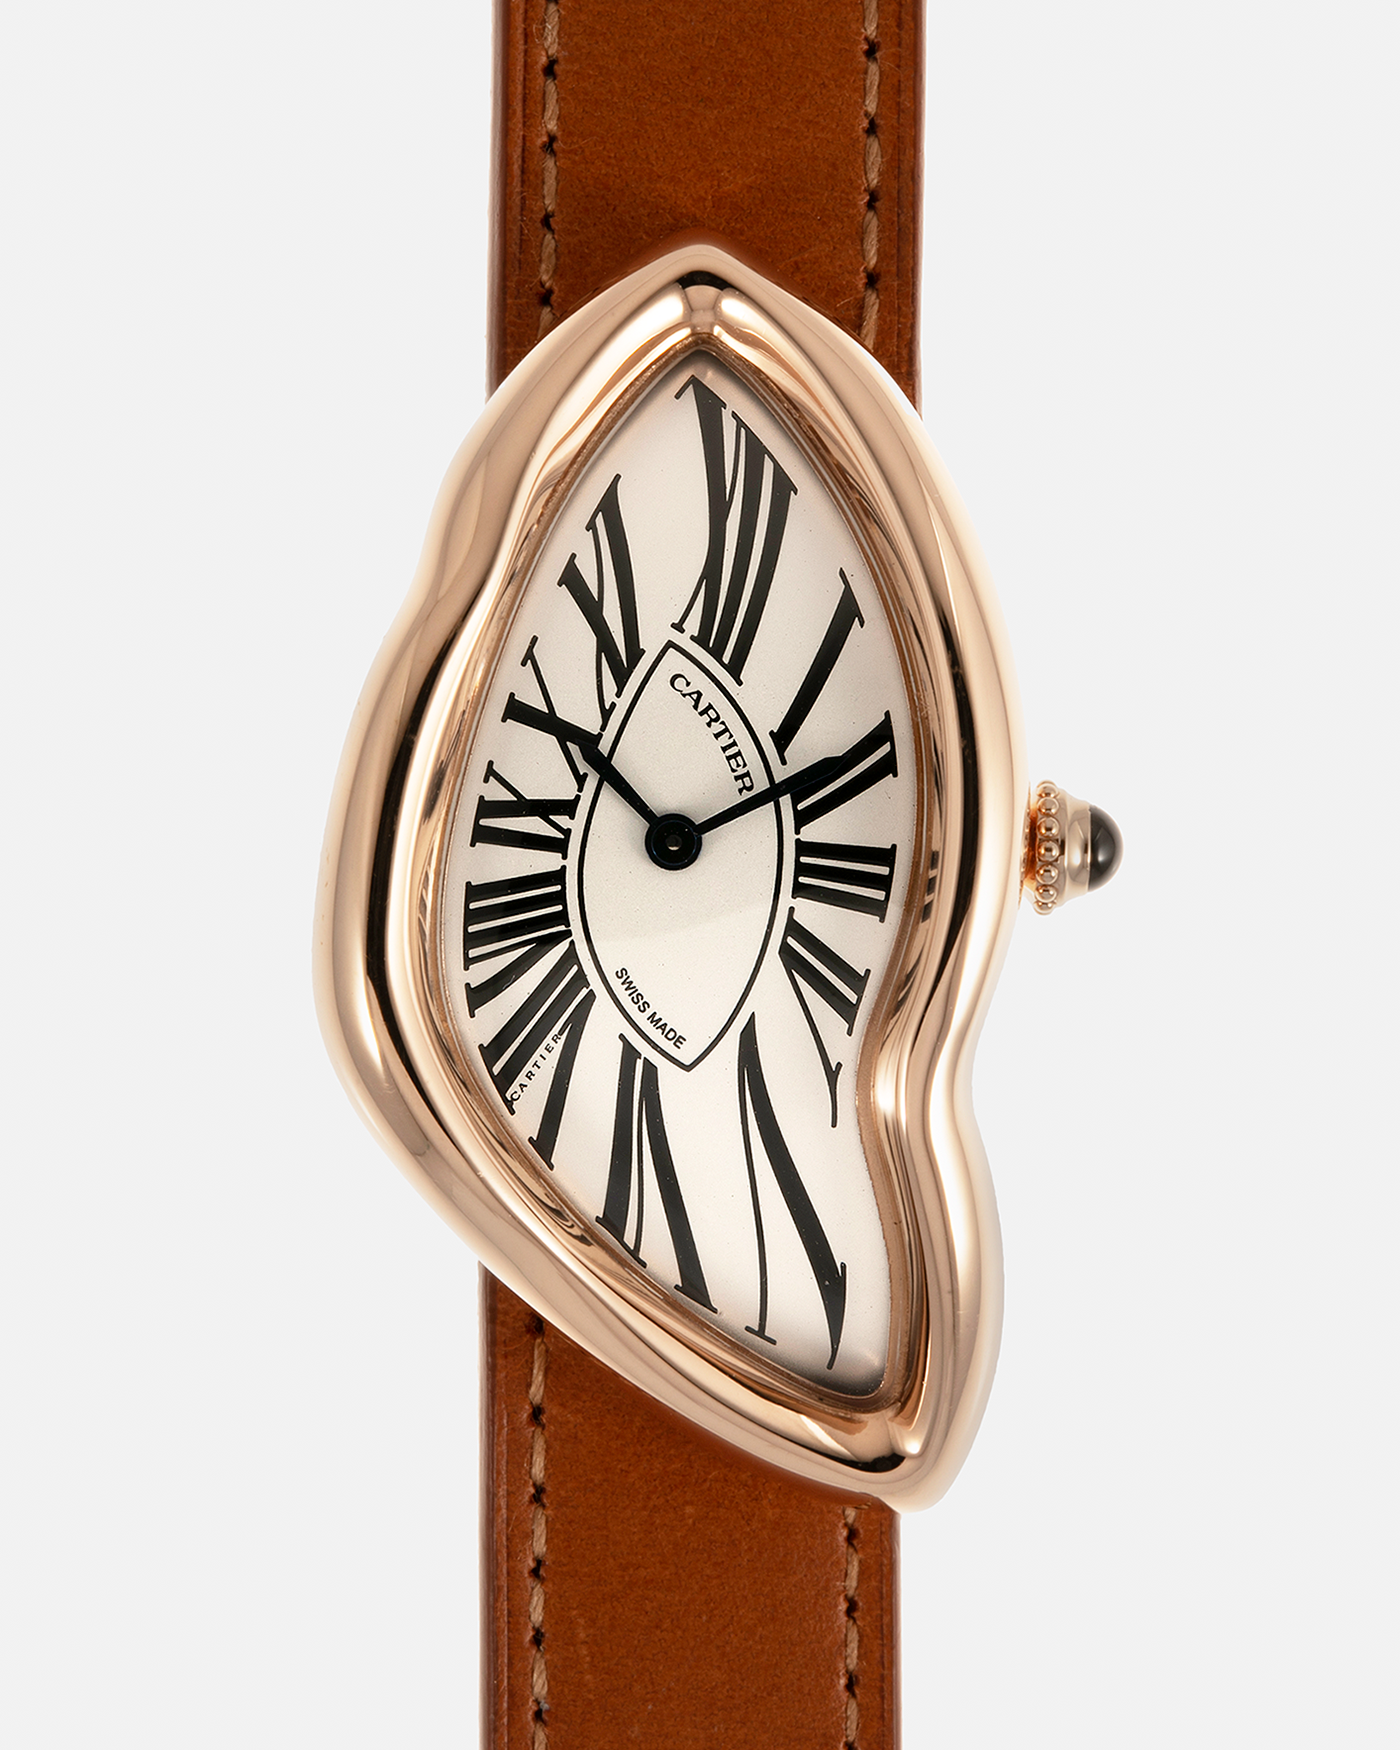 Brand: Cartier Year: 2022 Model: Crash Reference Number: WGCH0031, New Special Order Material: 18-carat Rose Gold Movement: Cartier Cal. 1917 MC, Manual-Winding Case Diameter: 42mm x 24mm (Asymmetrical Case) Strap: Cartier Tanned Brown Leather with Signed 18-carat Rose Gold ‘Crash’ Deployant Clasp